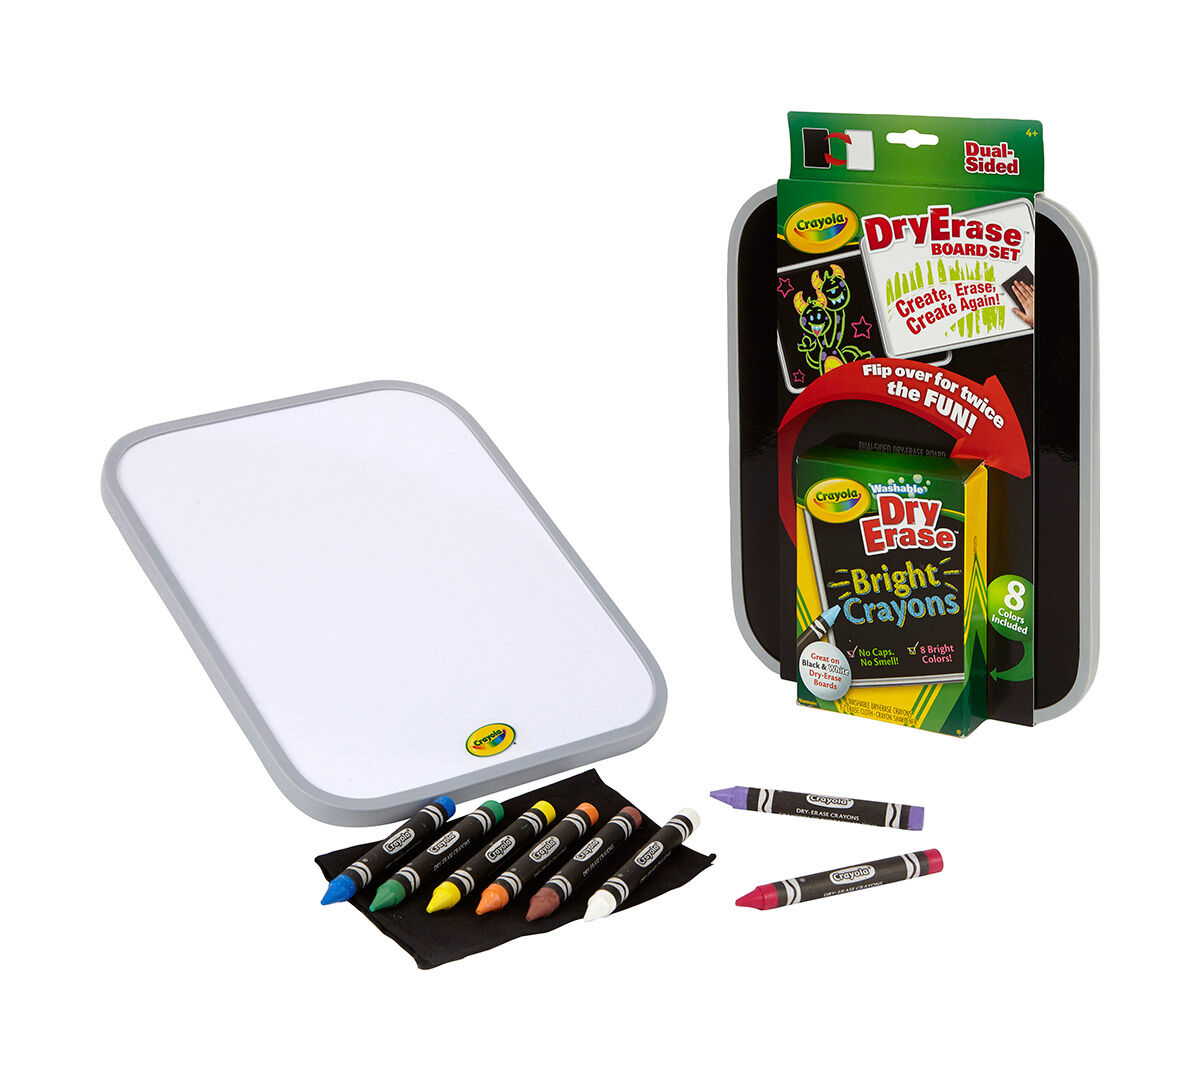 Download Dual-Sided Dry Erase Board Set with Bright Crayons | Crayola